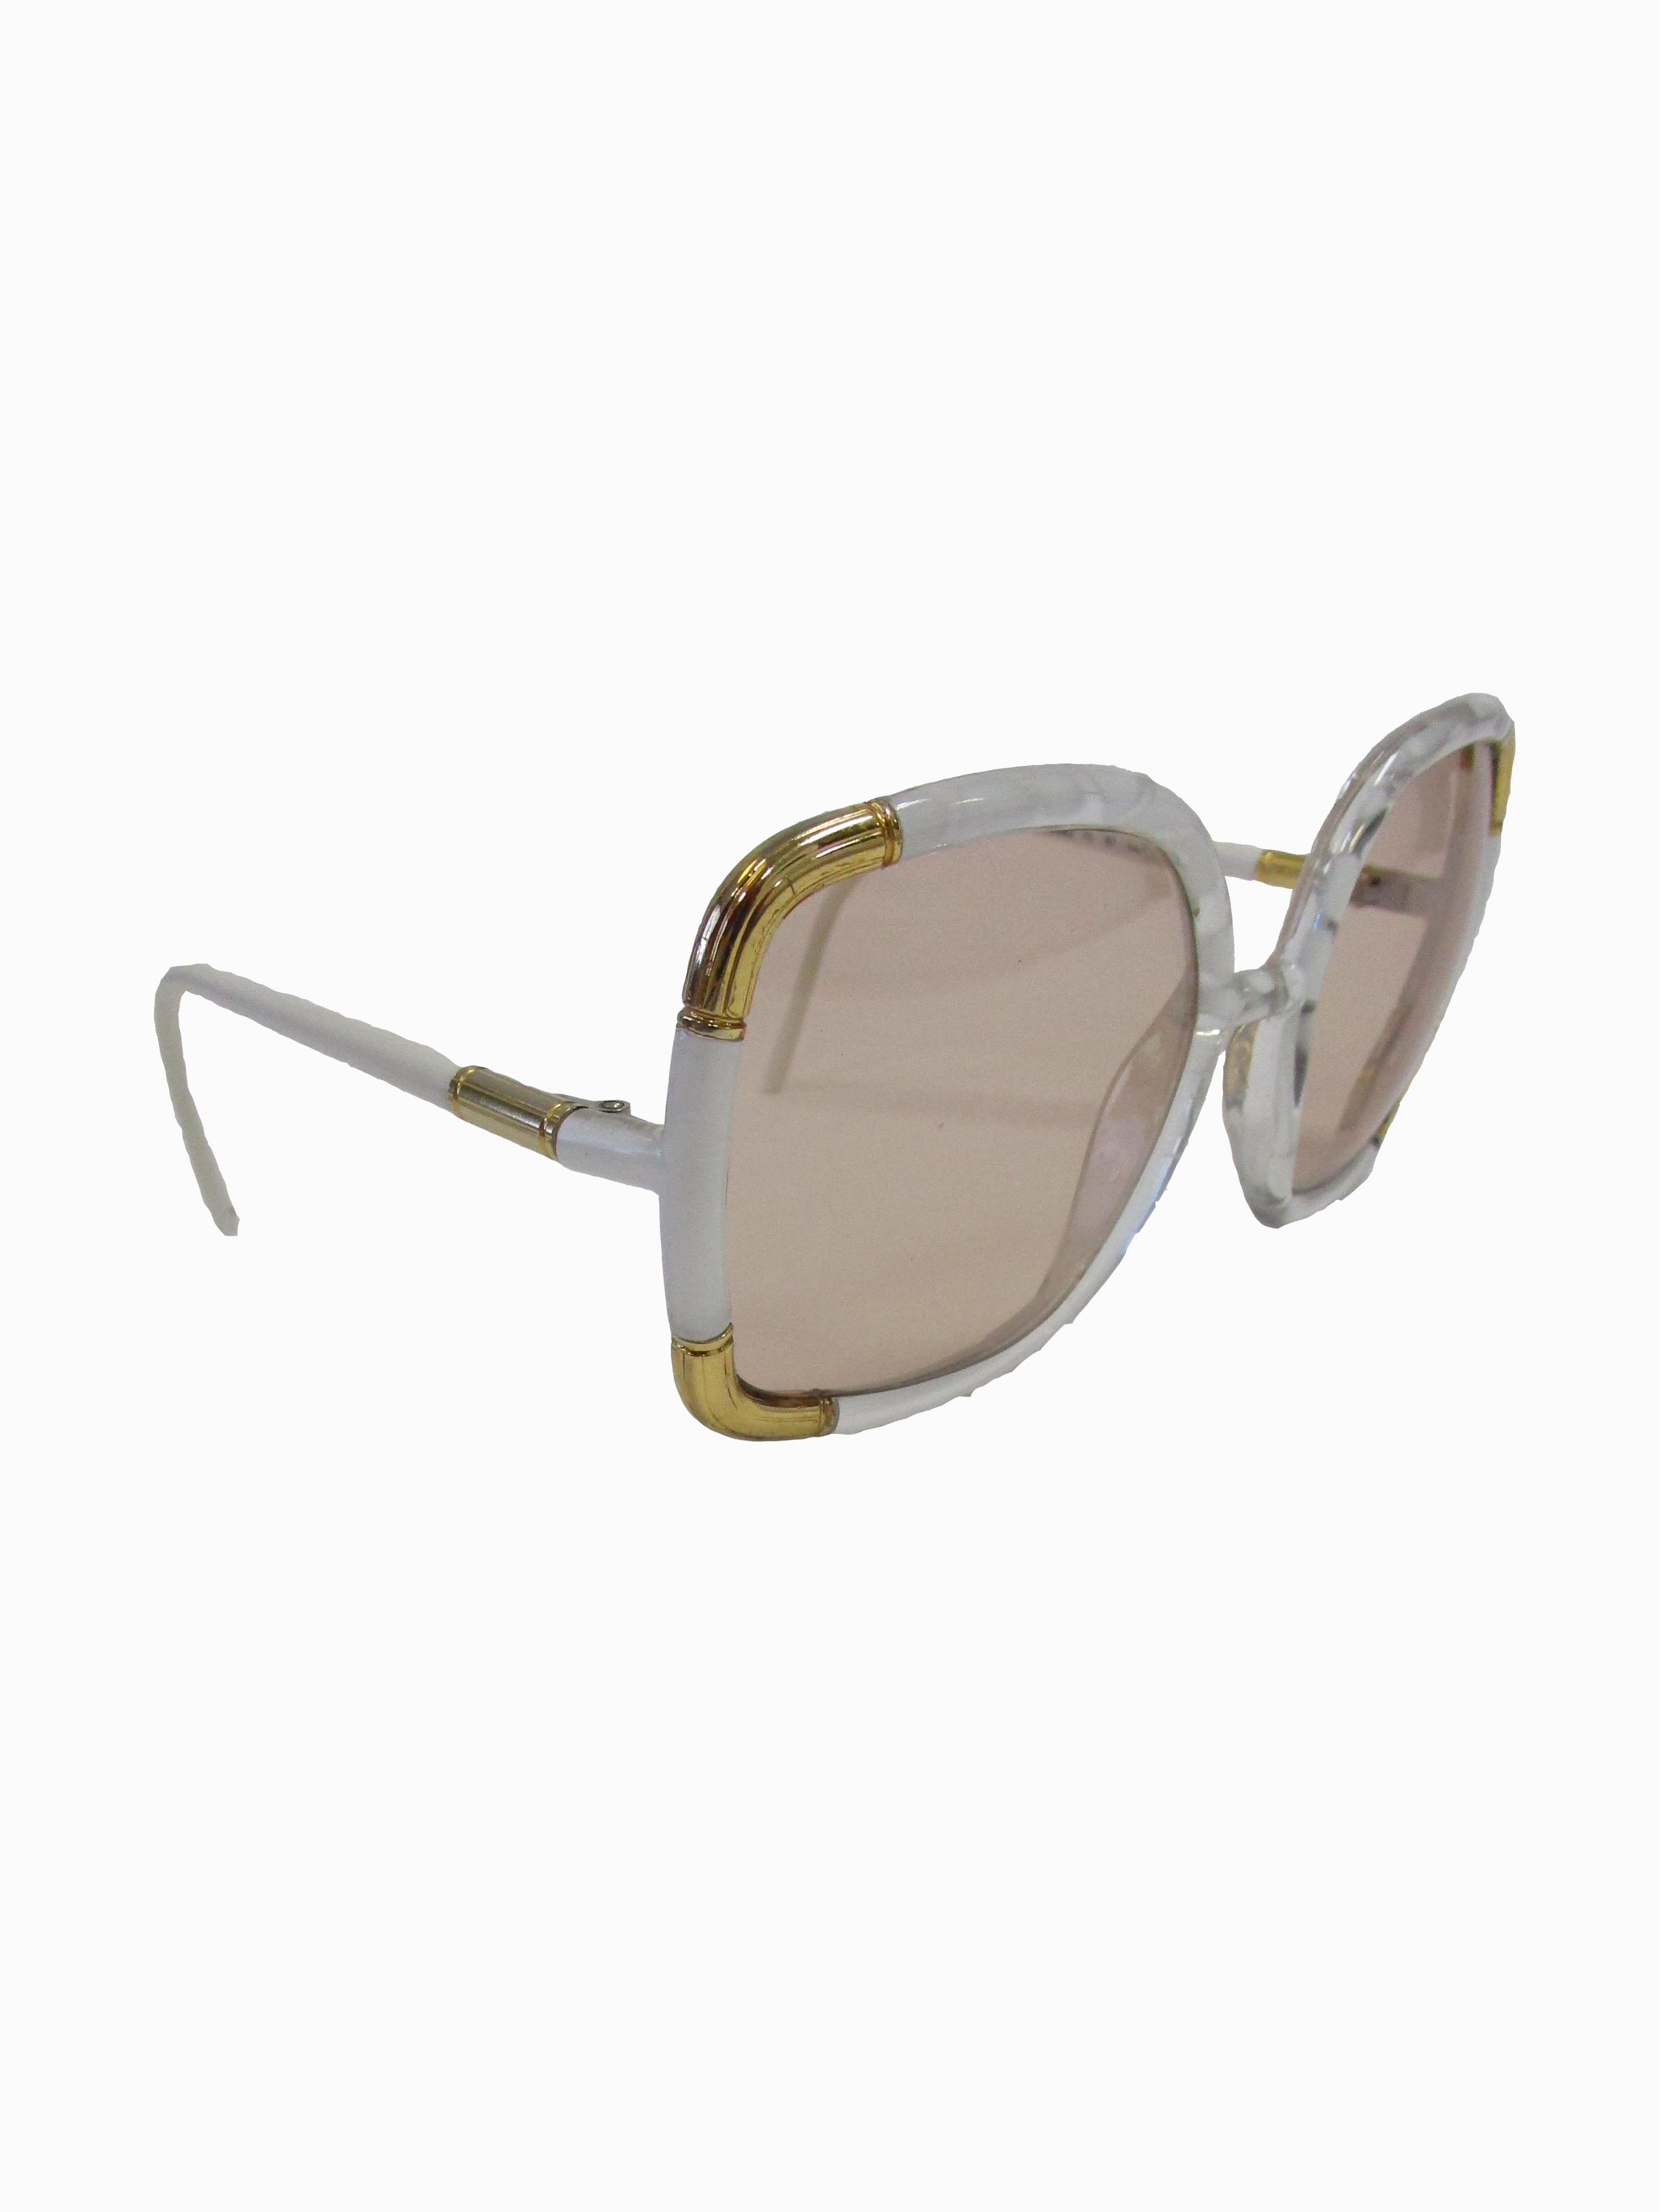 Classic Ted Lapidus Paris sunglasses done in white marbled acrylic with gold hardware. Grey lenses are oversized.

Lens Width-57mm
Bridge Width- 15mm
Temple (arm) Length - 5in